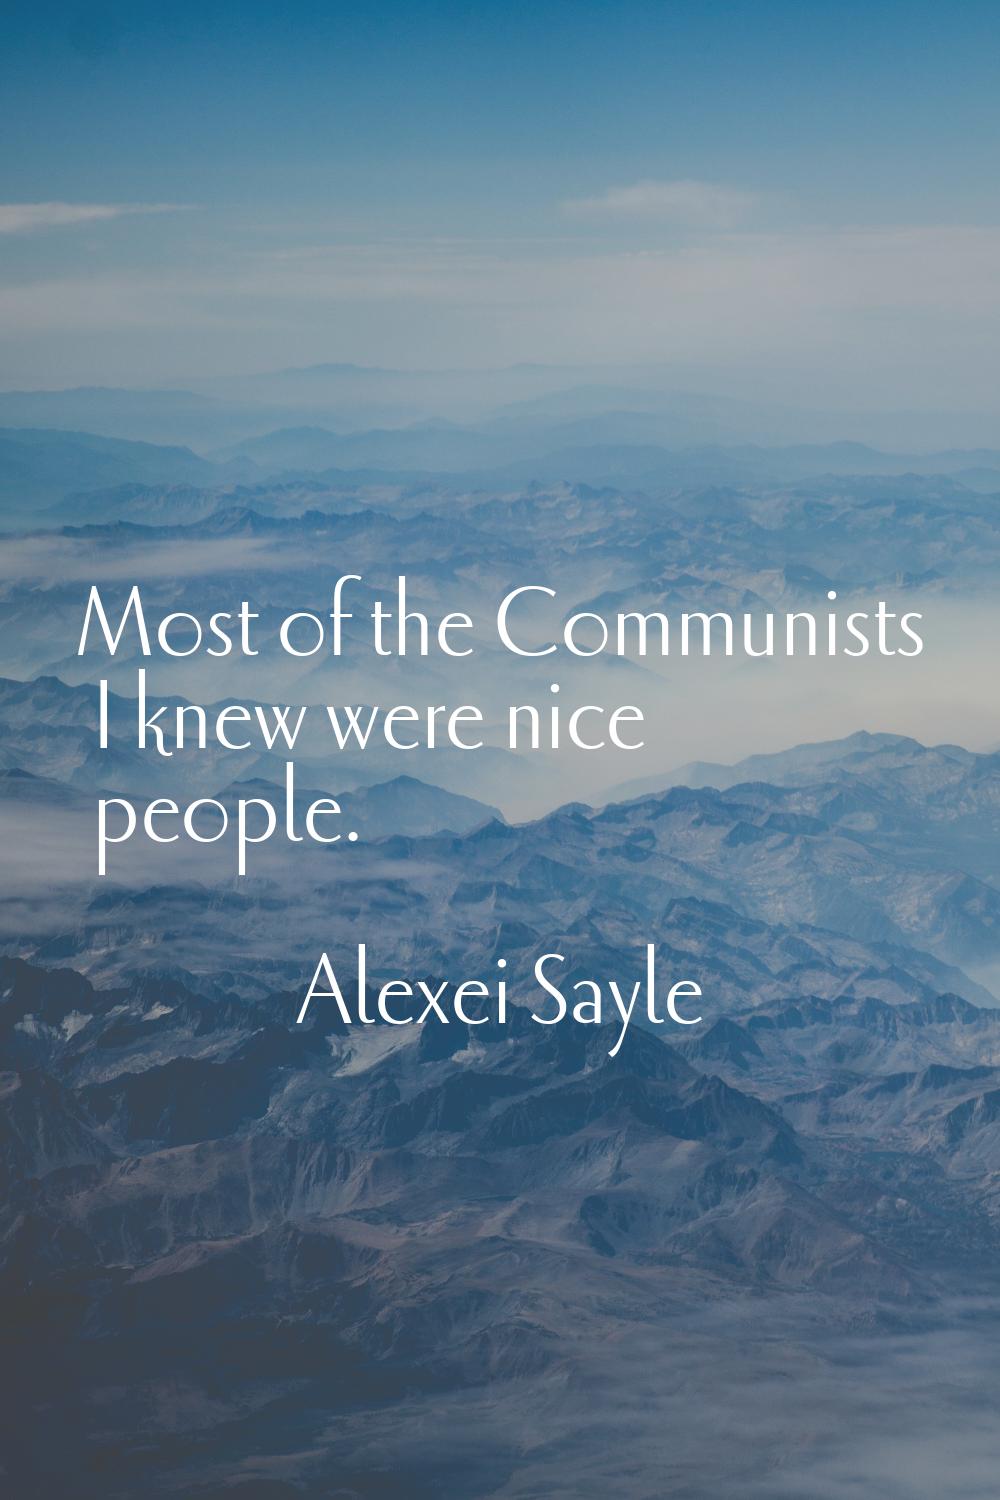 Most of the Communists I knew were nice people.